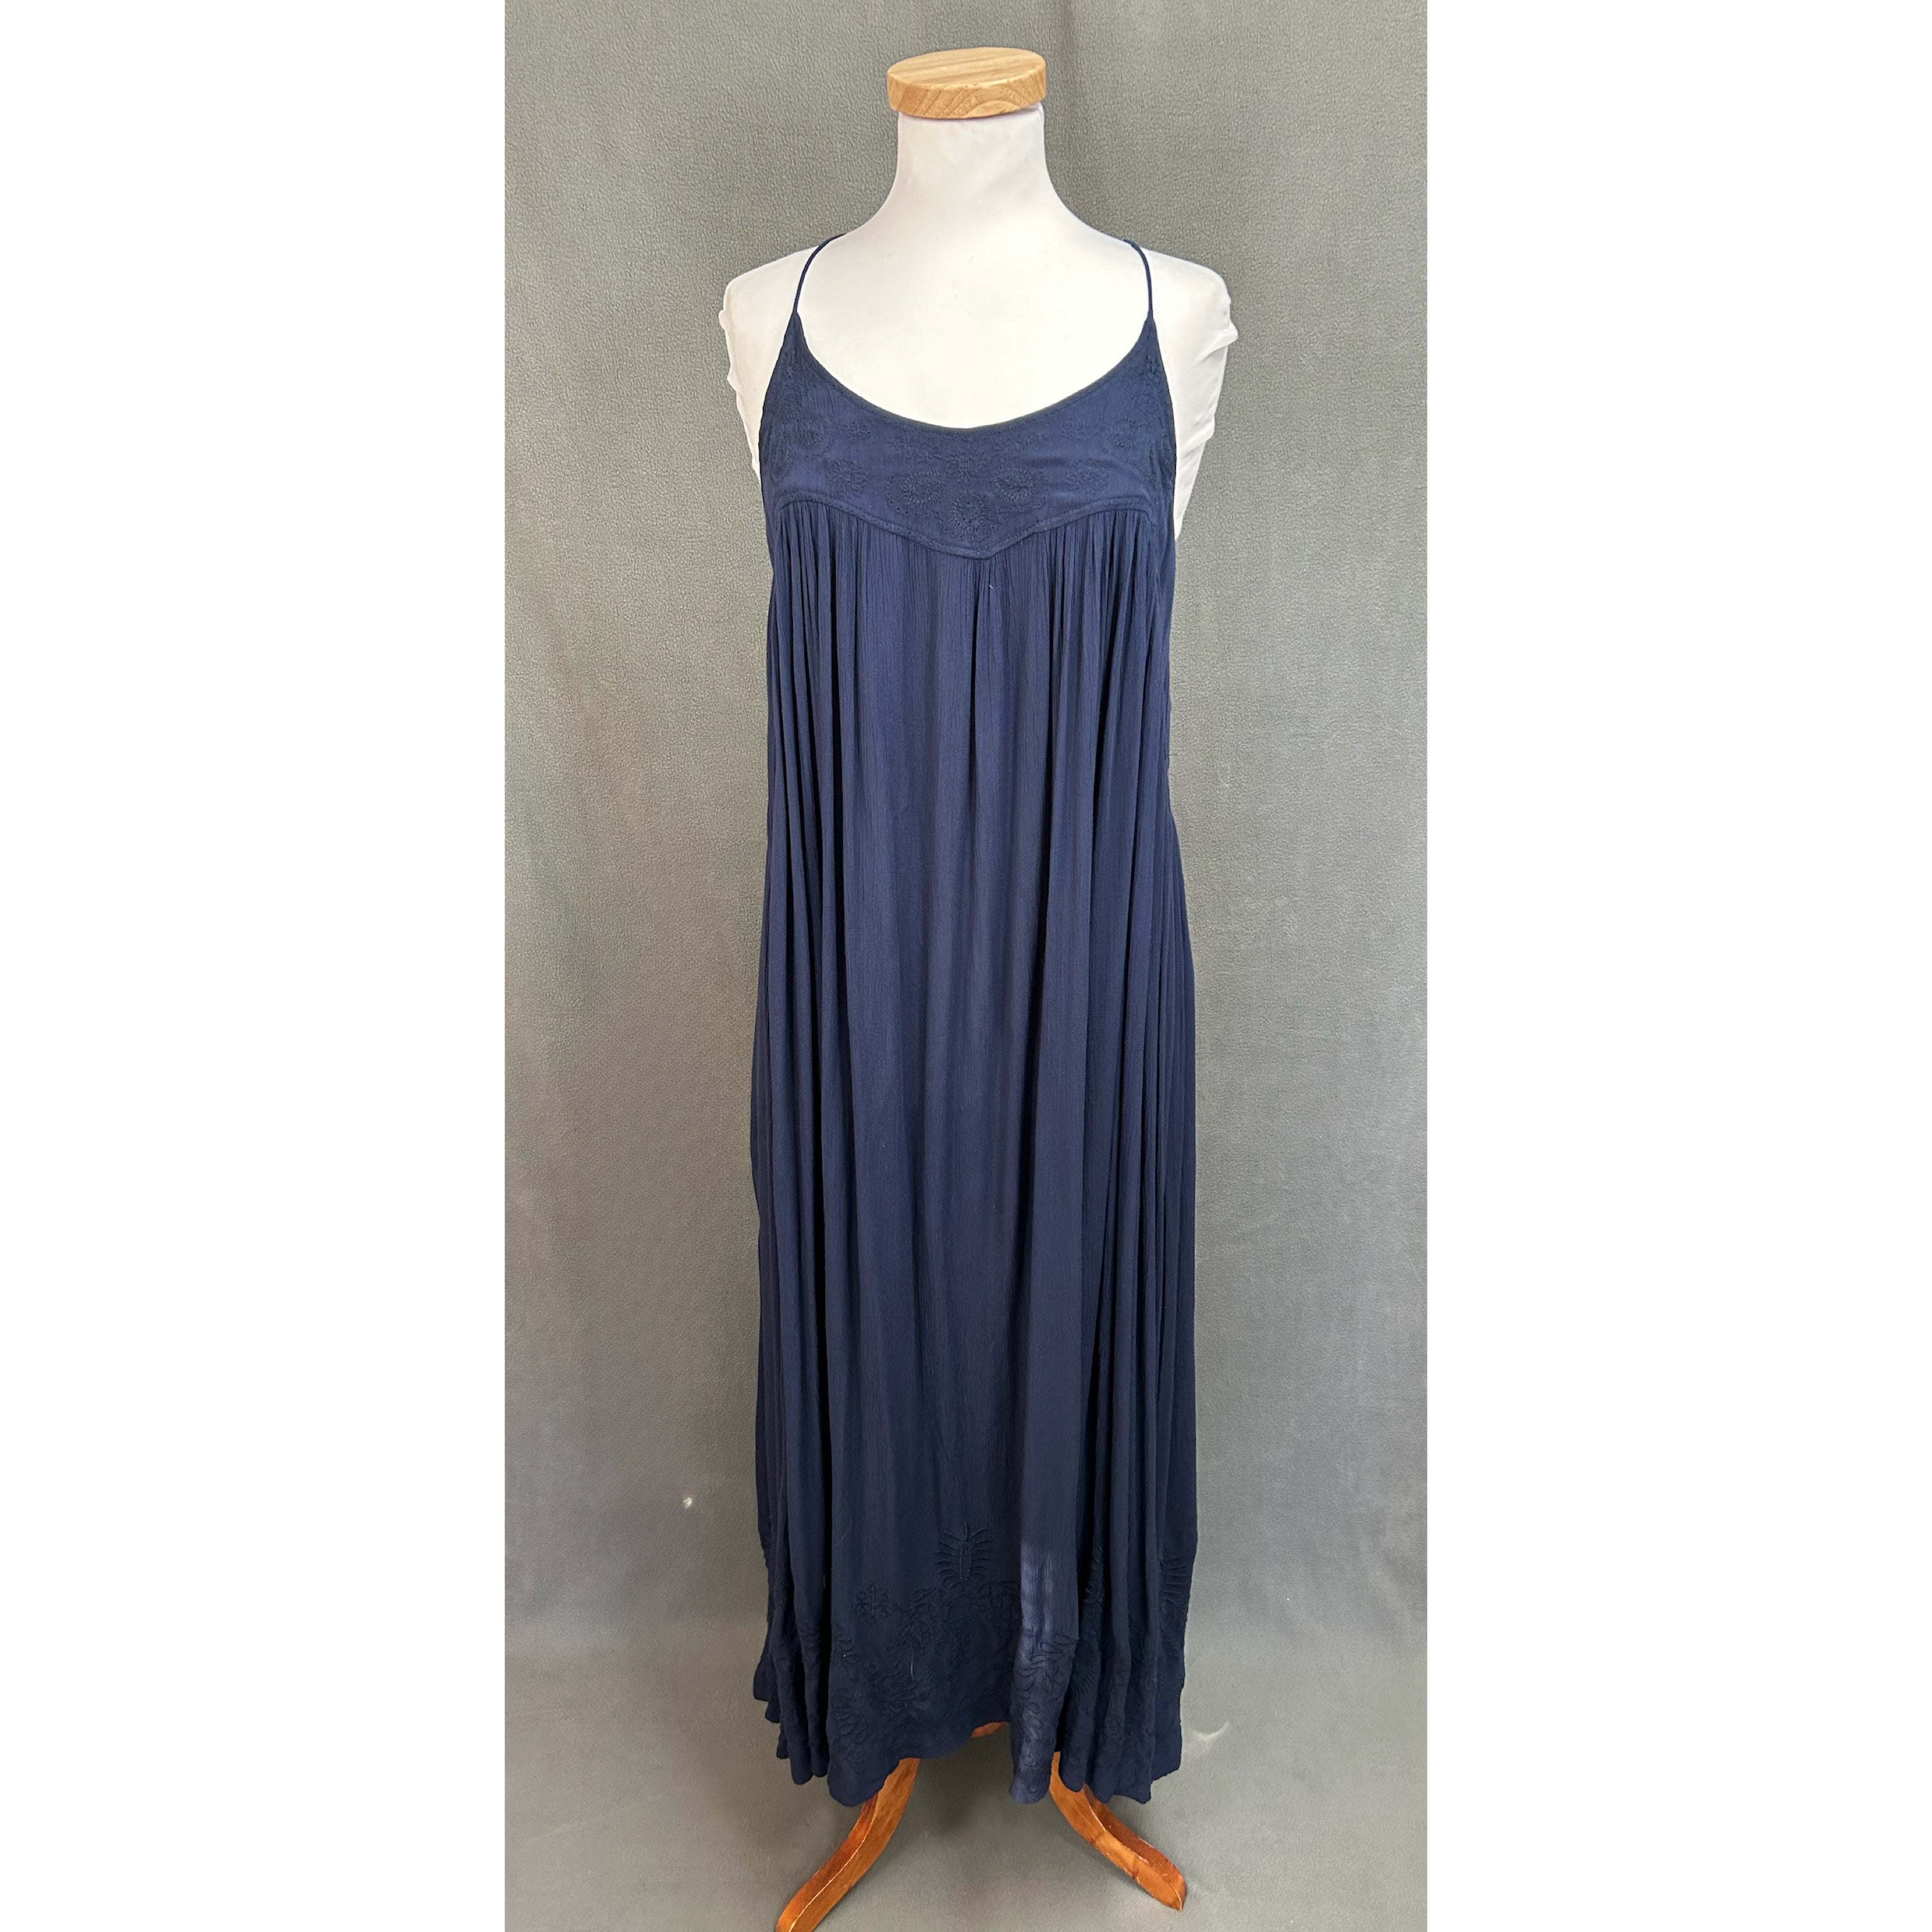 Free People navy dress, size S, NEW WITH TAGS!